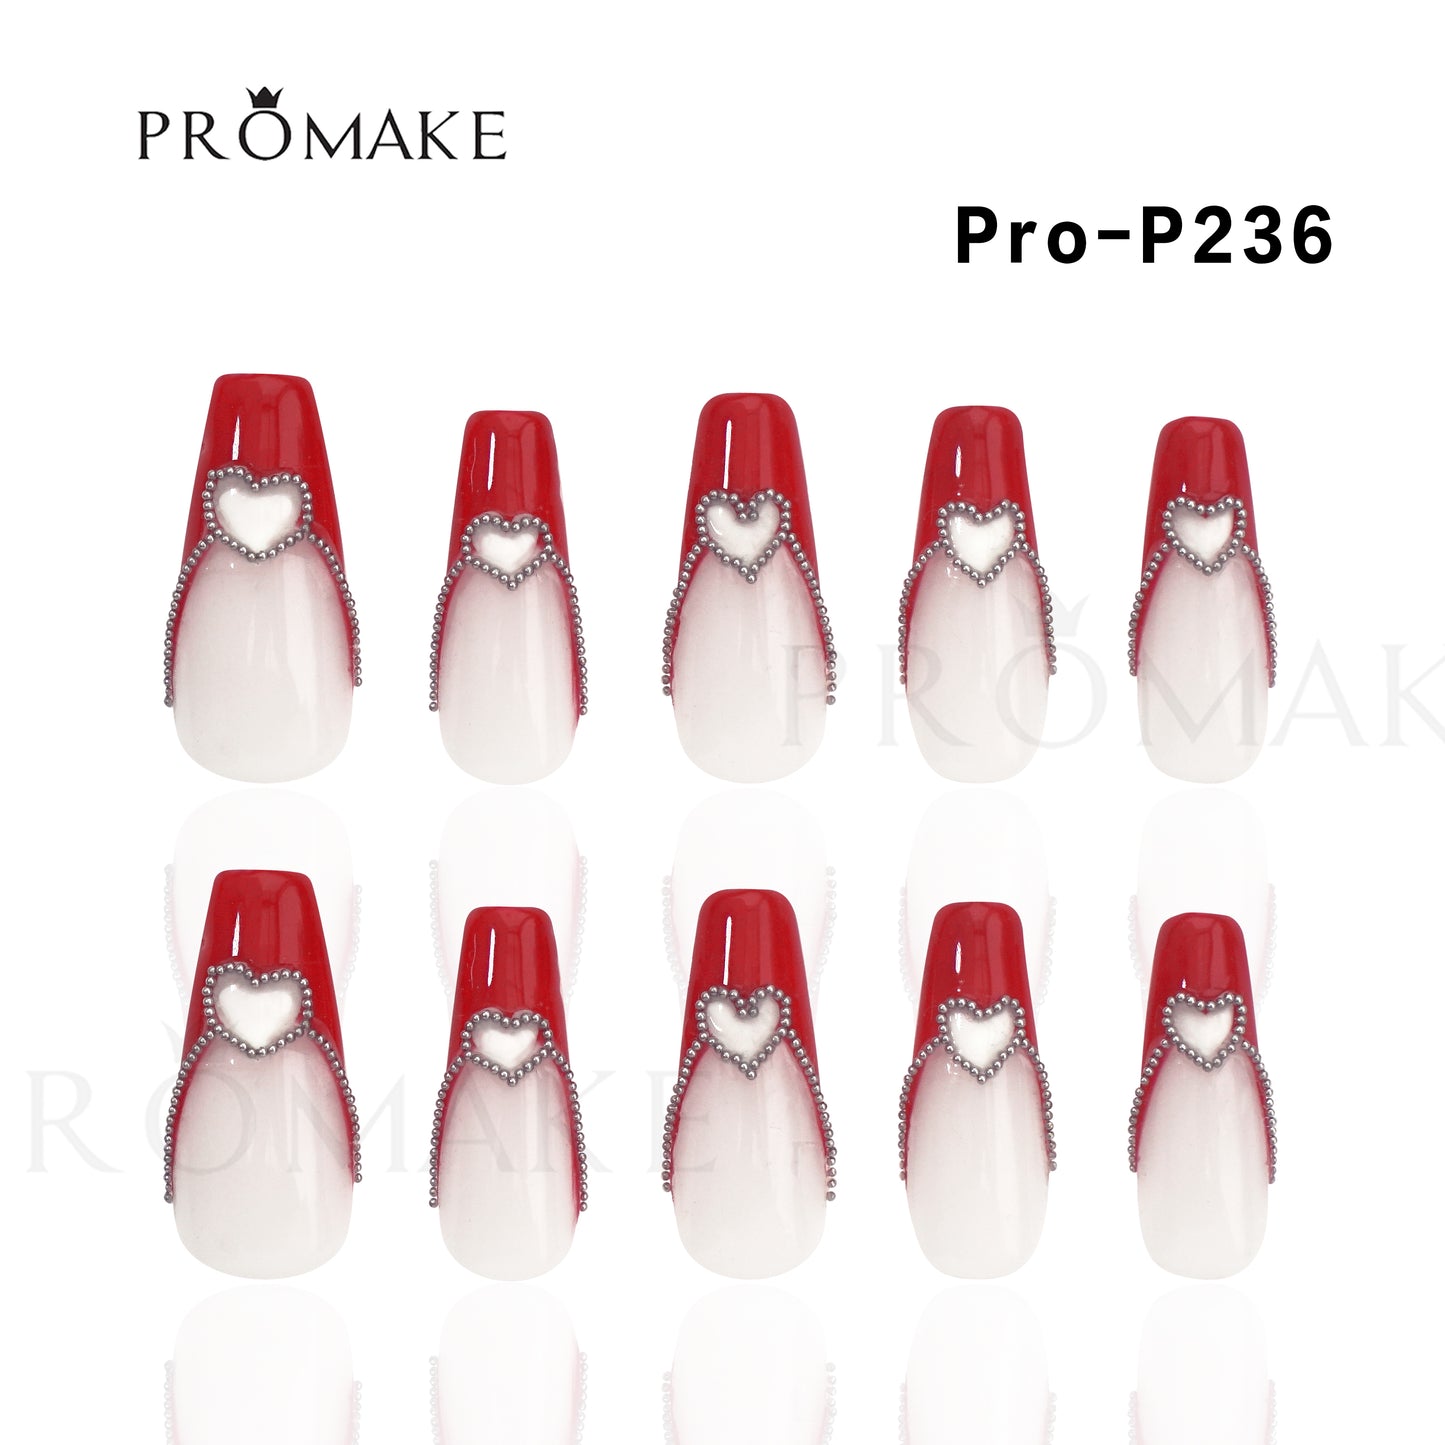 [New Arrival] Promake Luxury - Mid-Length H221-H240 - Handmade Press On Nails 10PCS Reuseable Nails wtih Nail tools